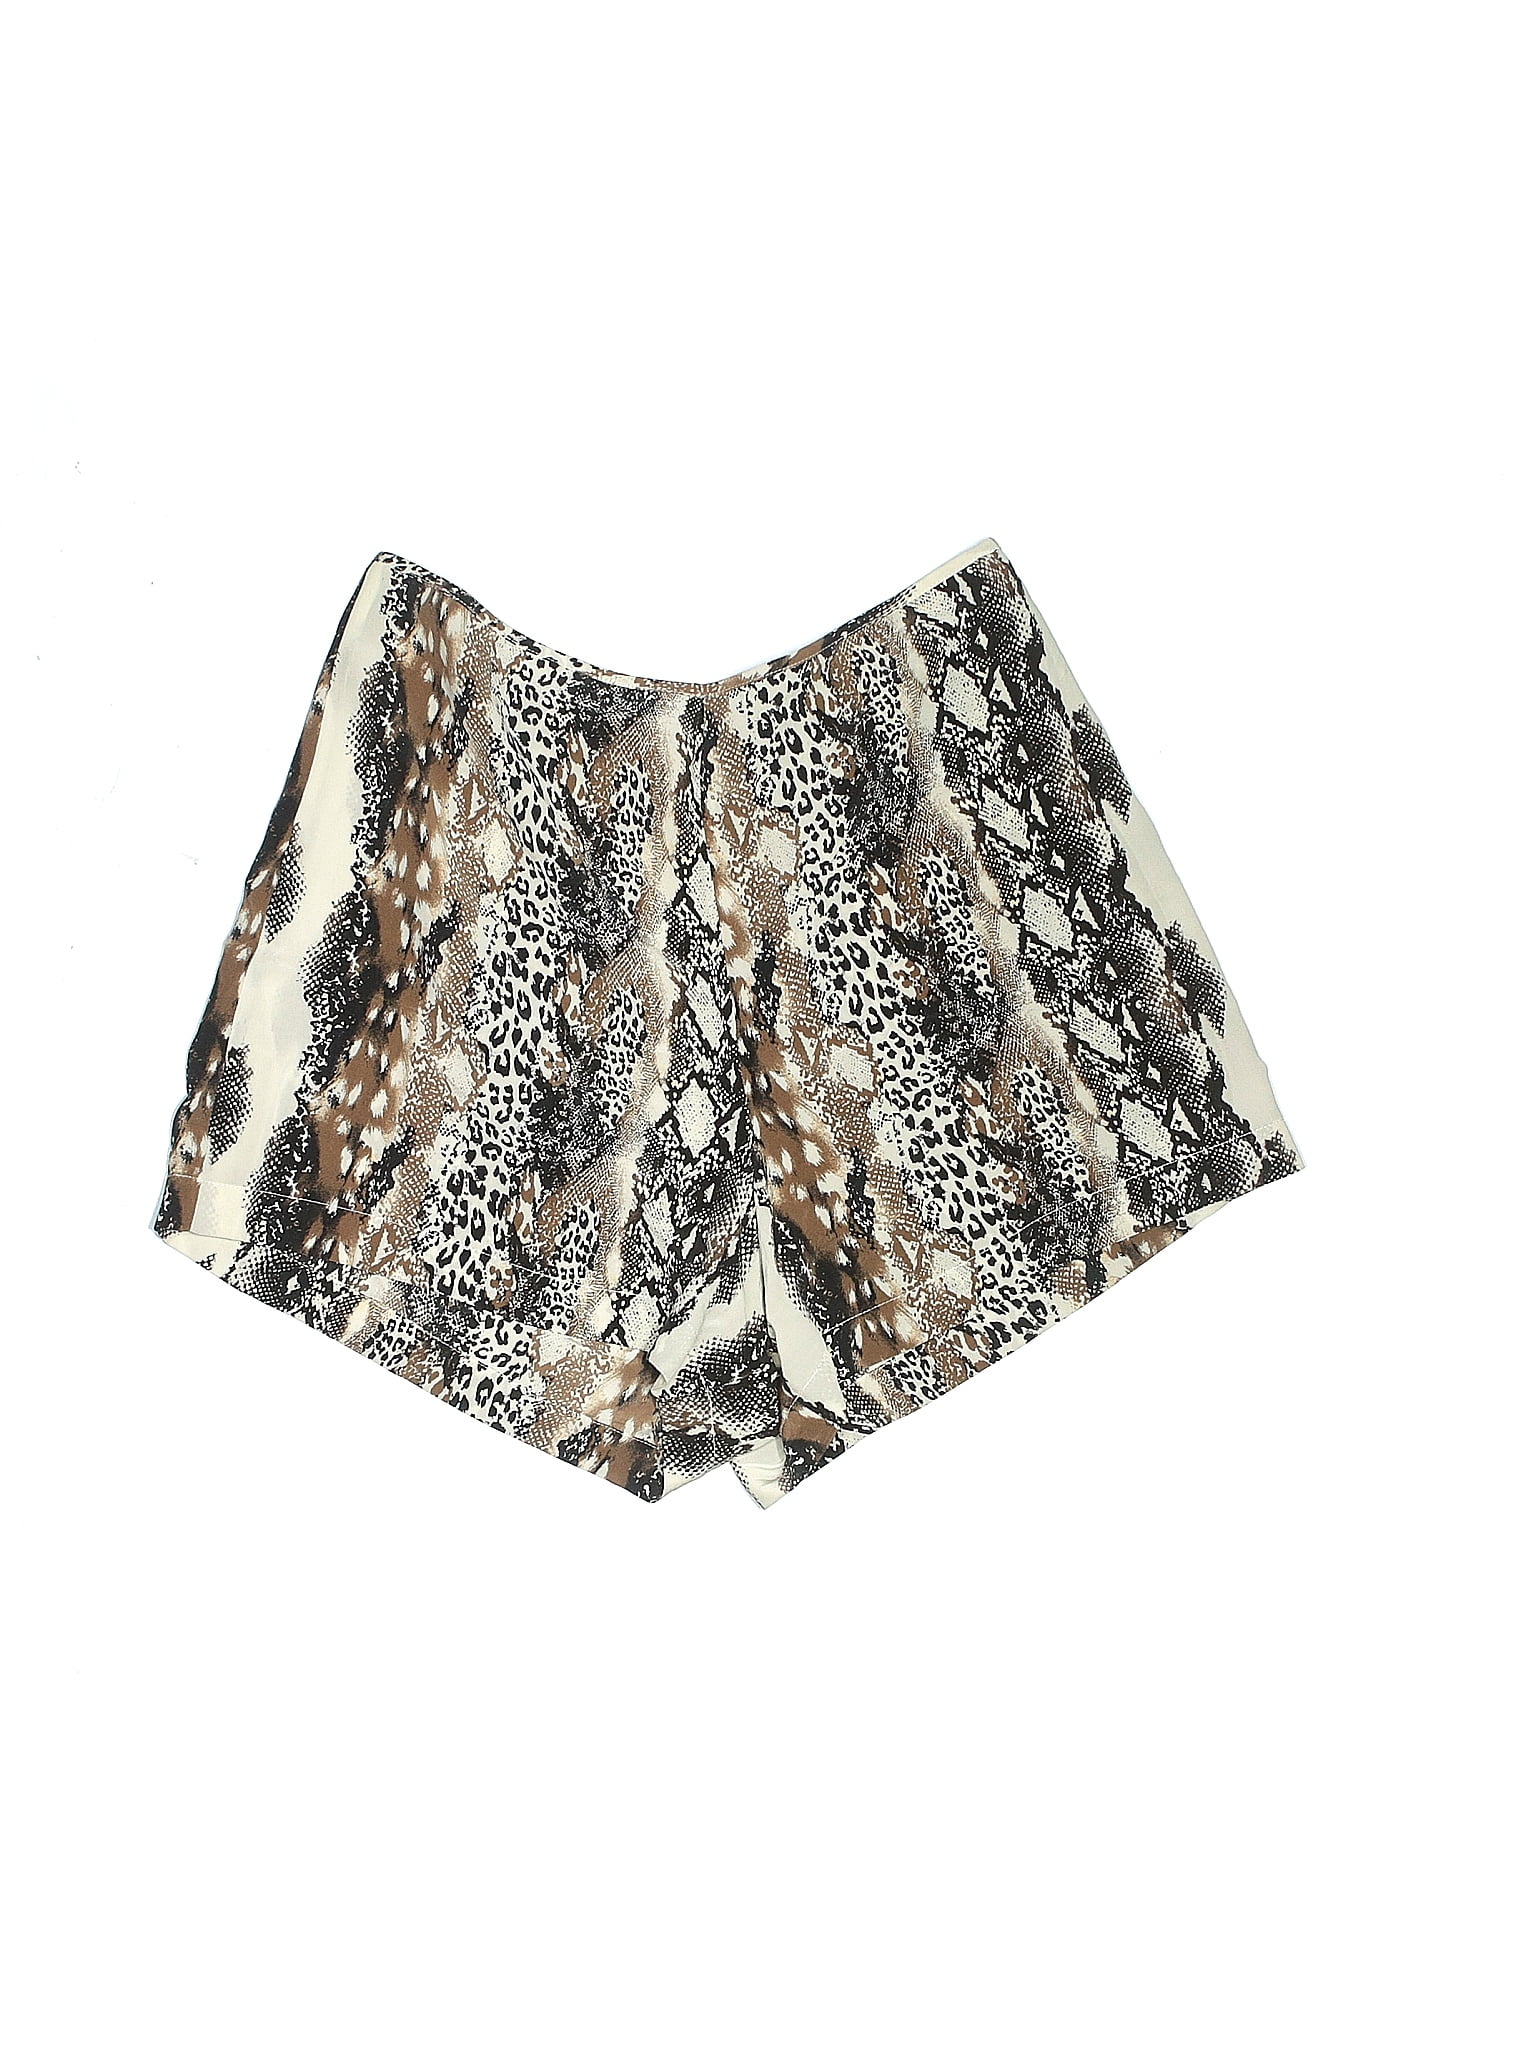 Equipment 100% Silk Snake Print Multi Color Tan Shorts Size S - 86% off ...